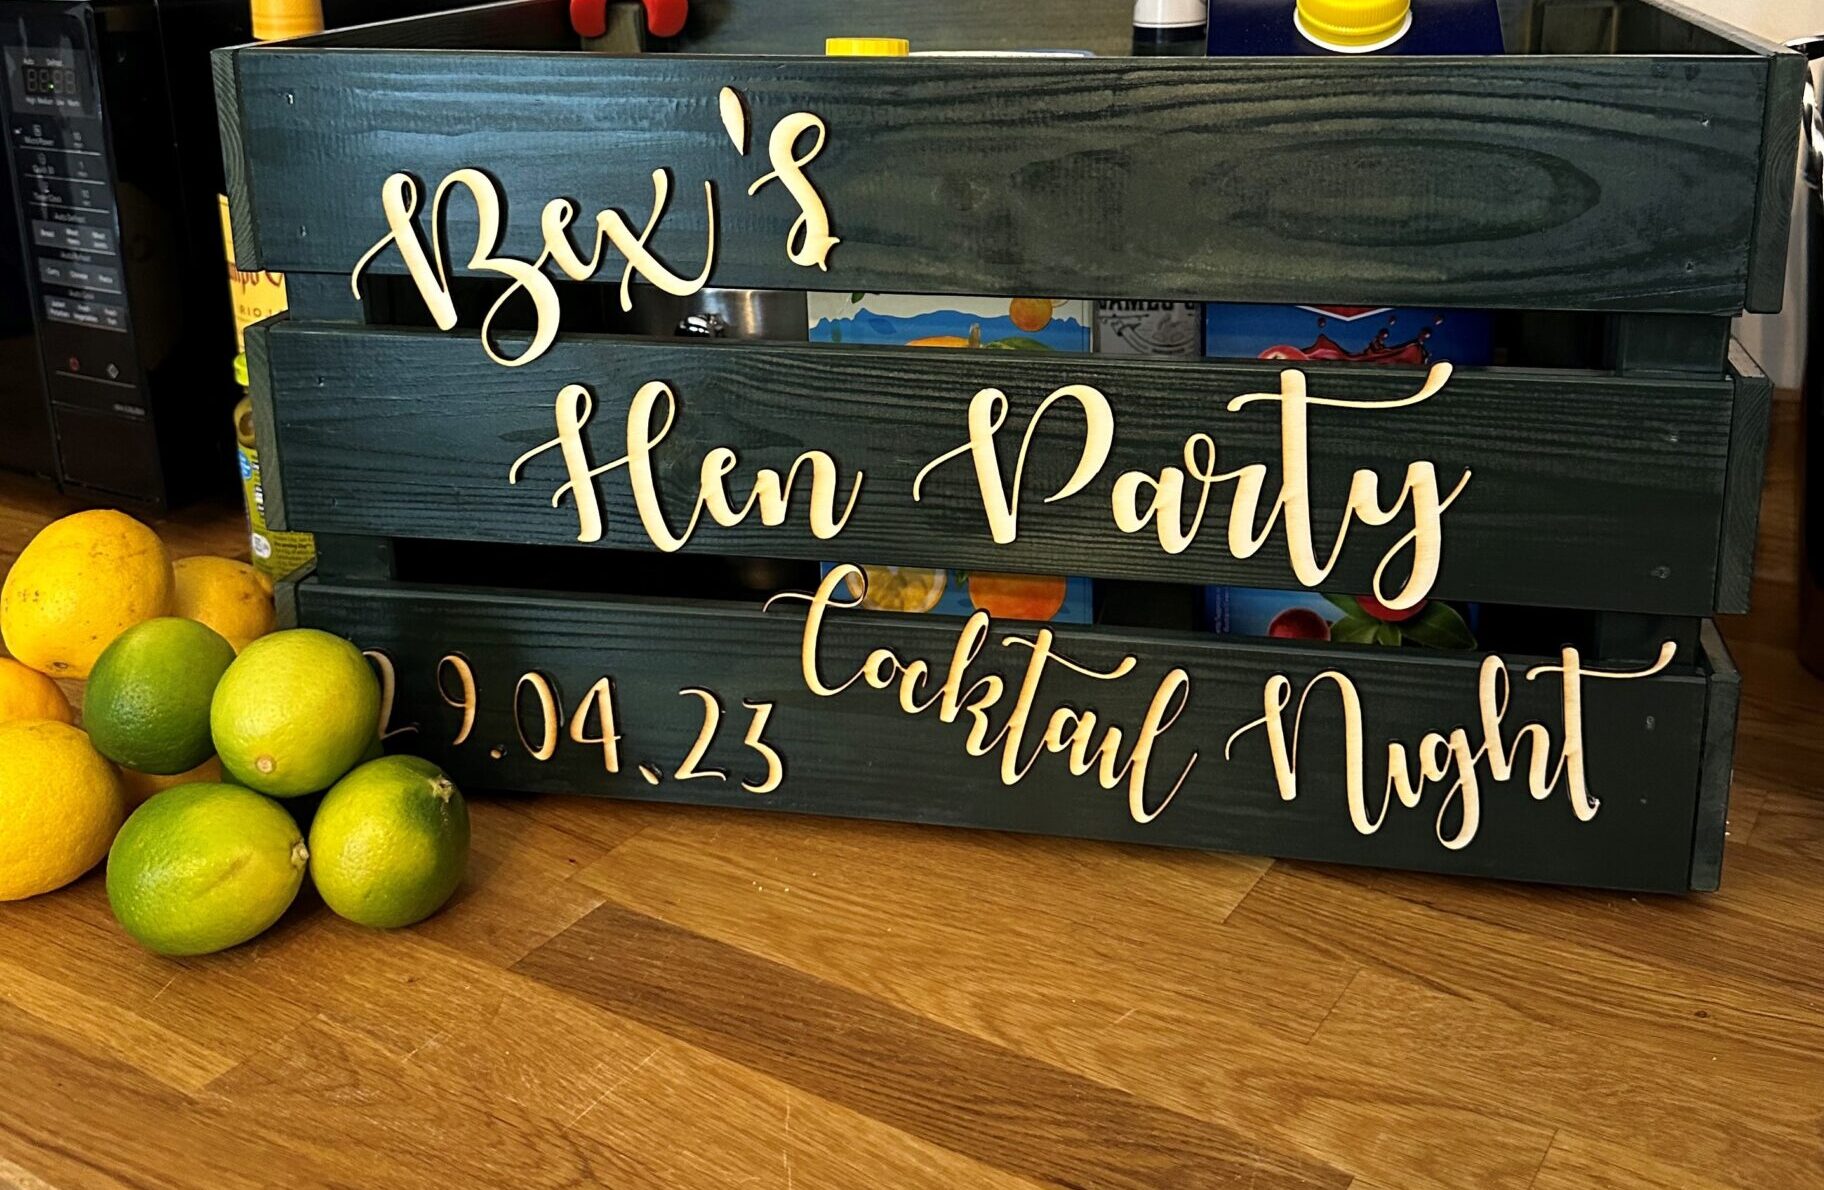 Personalised wooden wedding crates